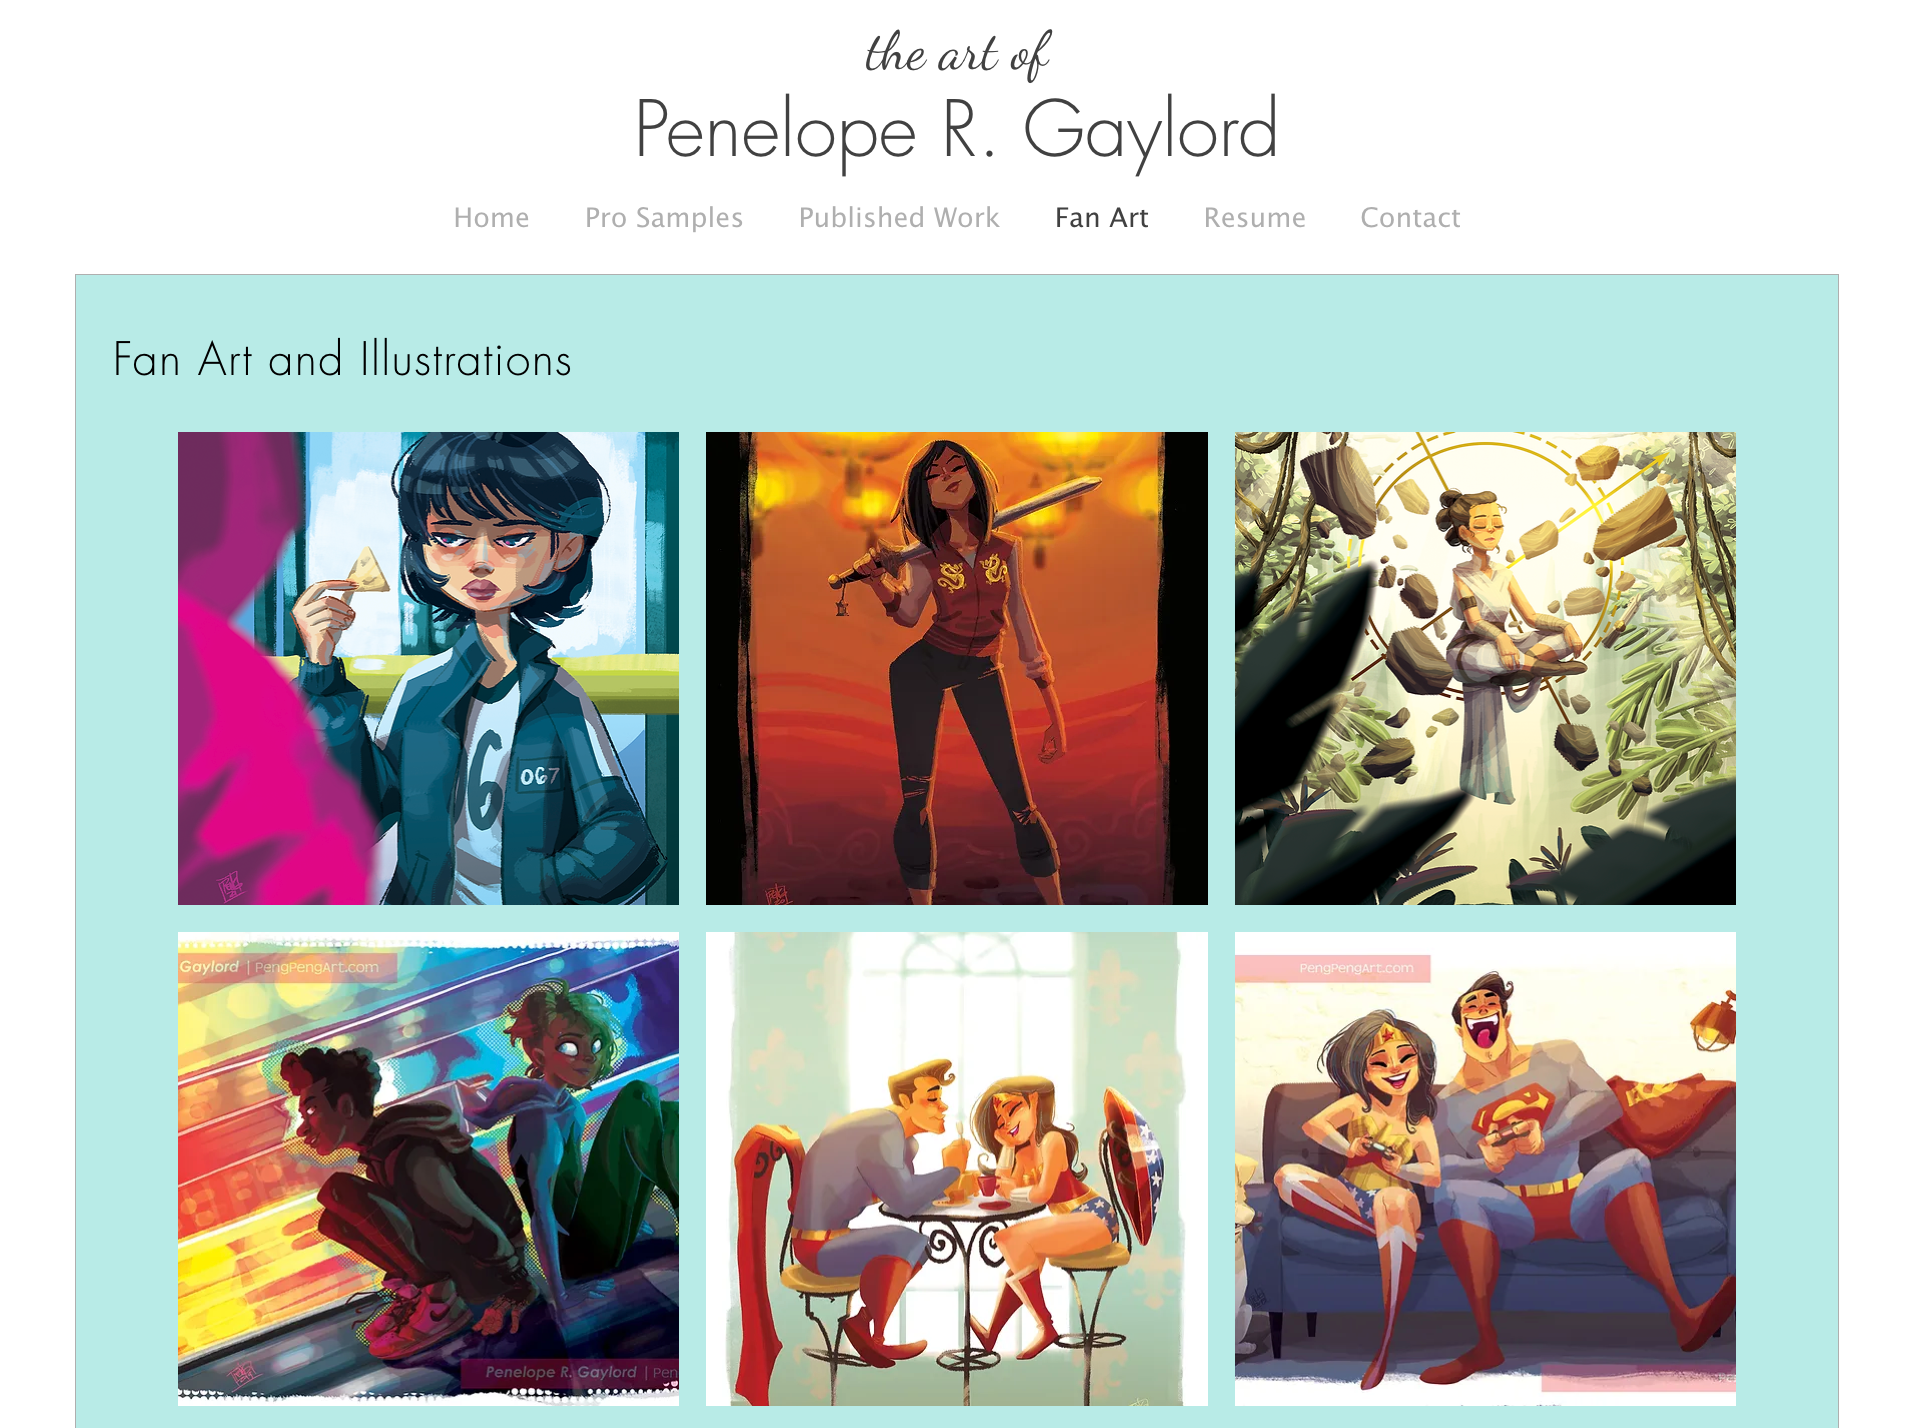 The Art of Penelope R. Gaylord